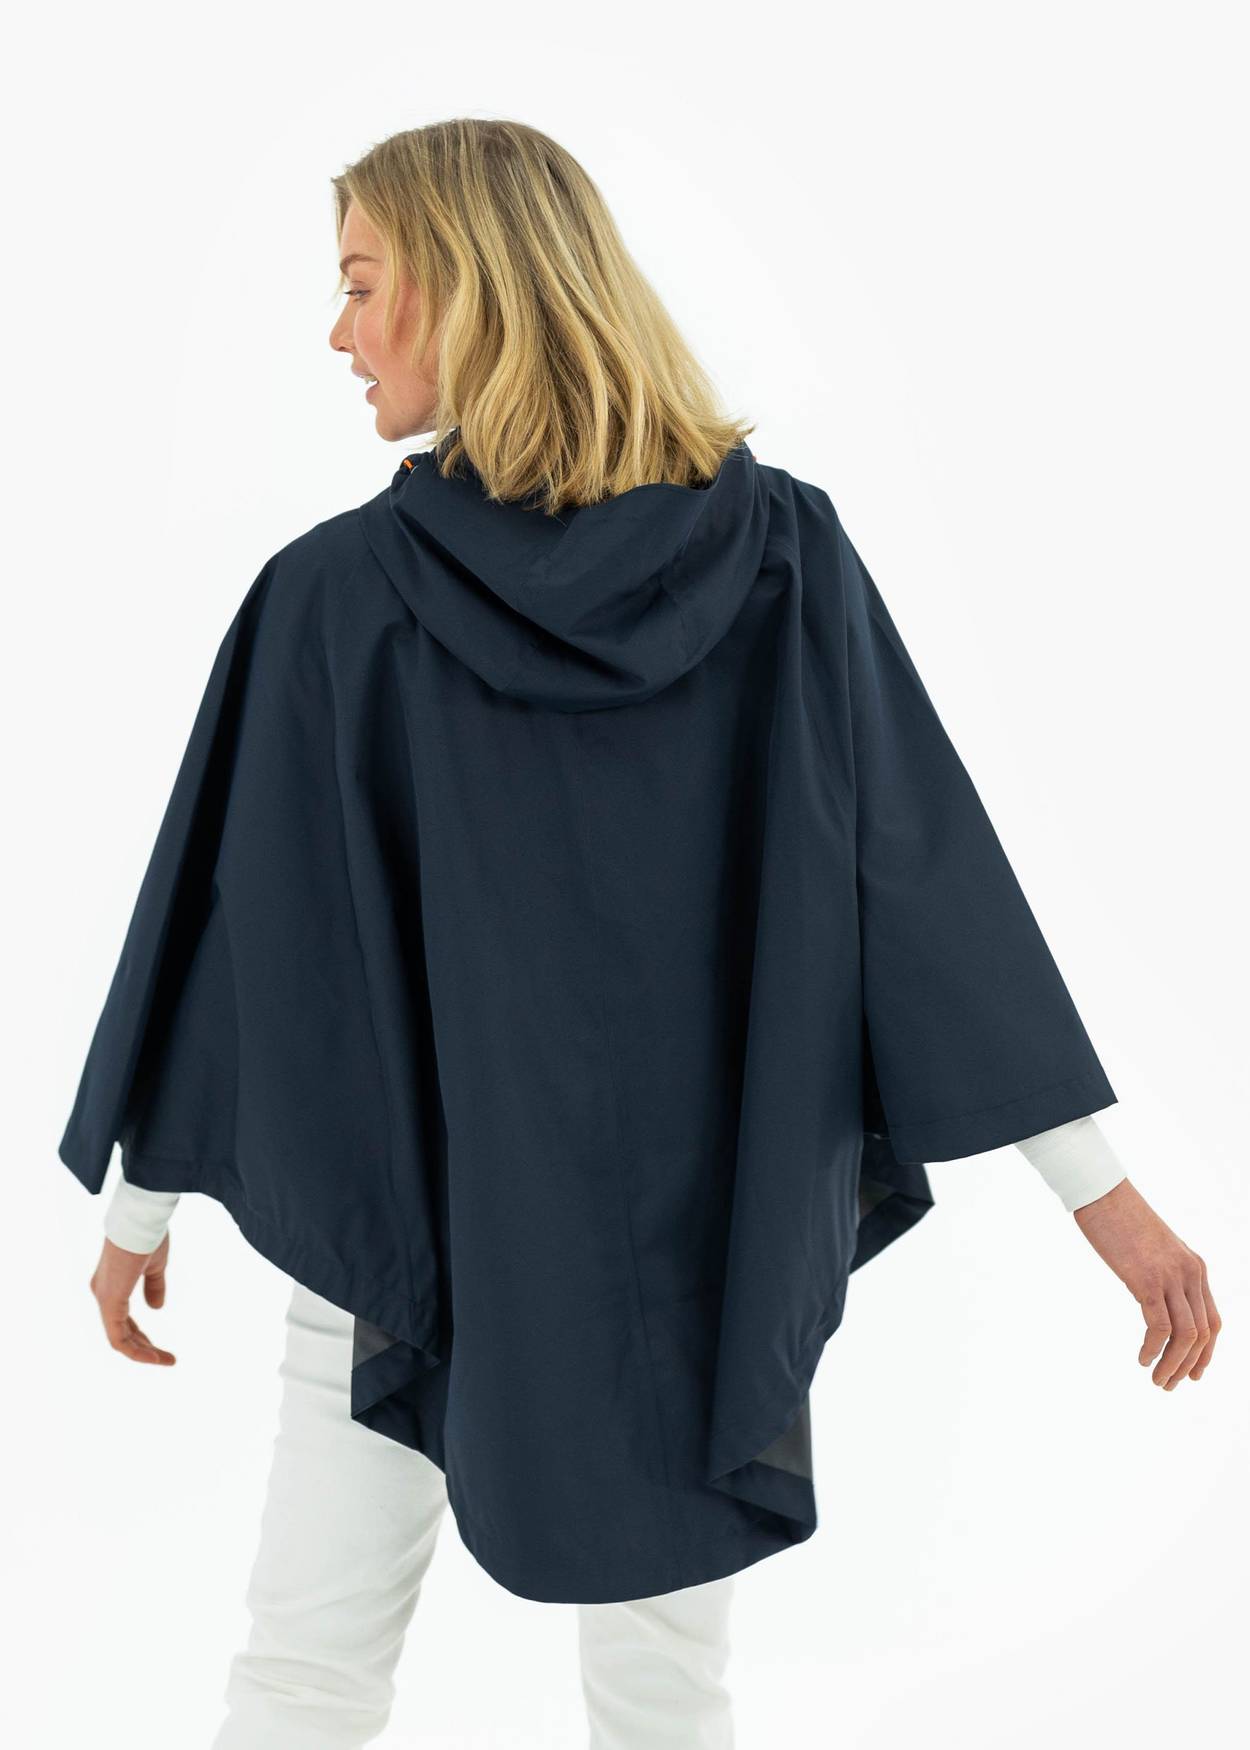 The Poncho